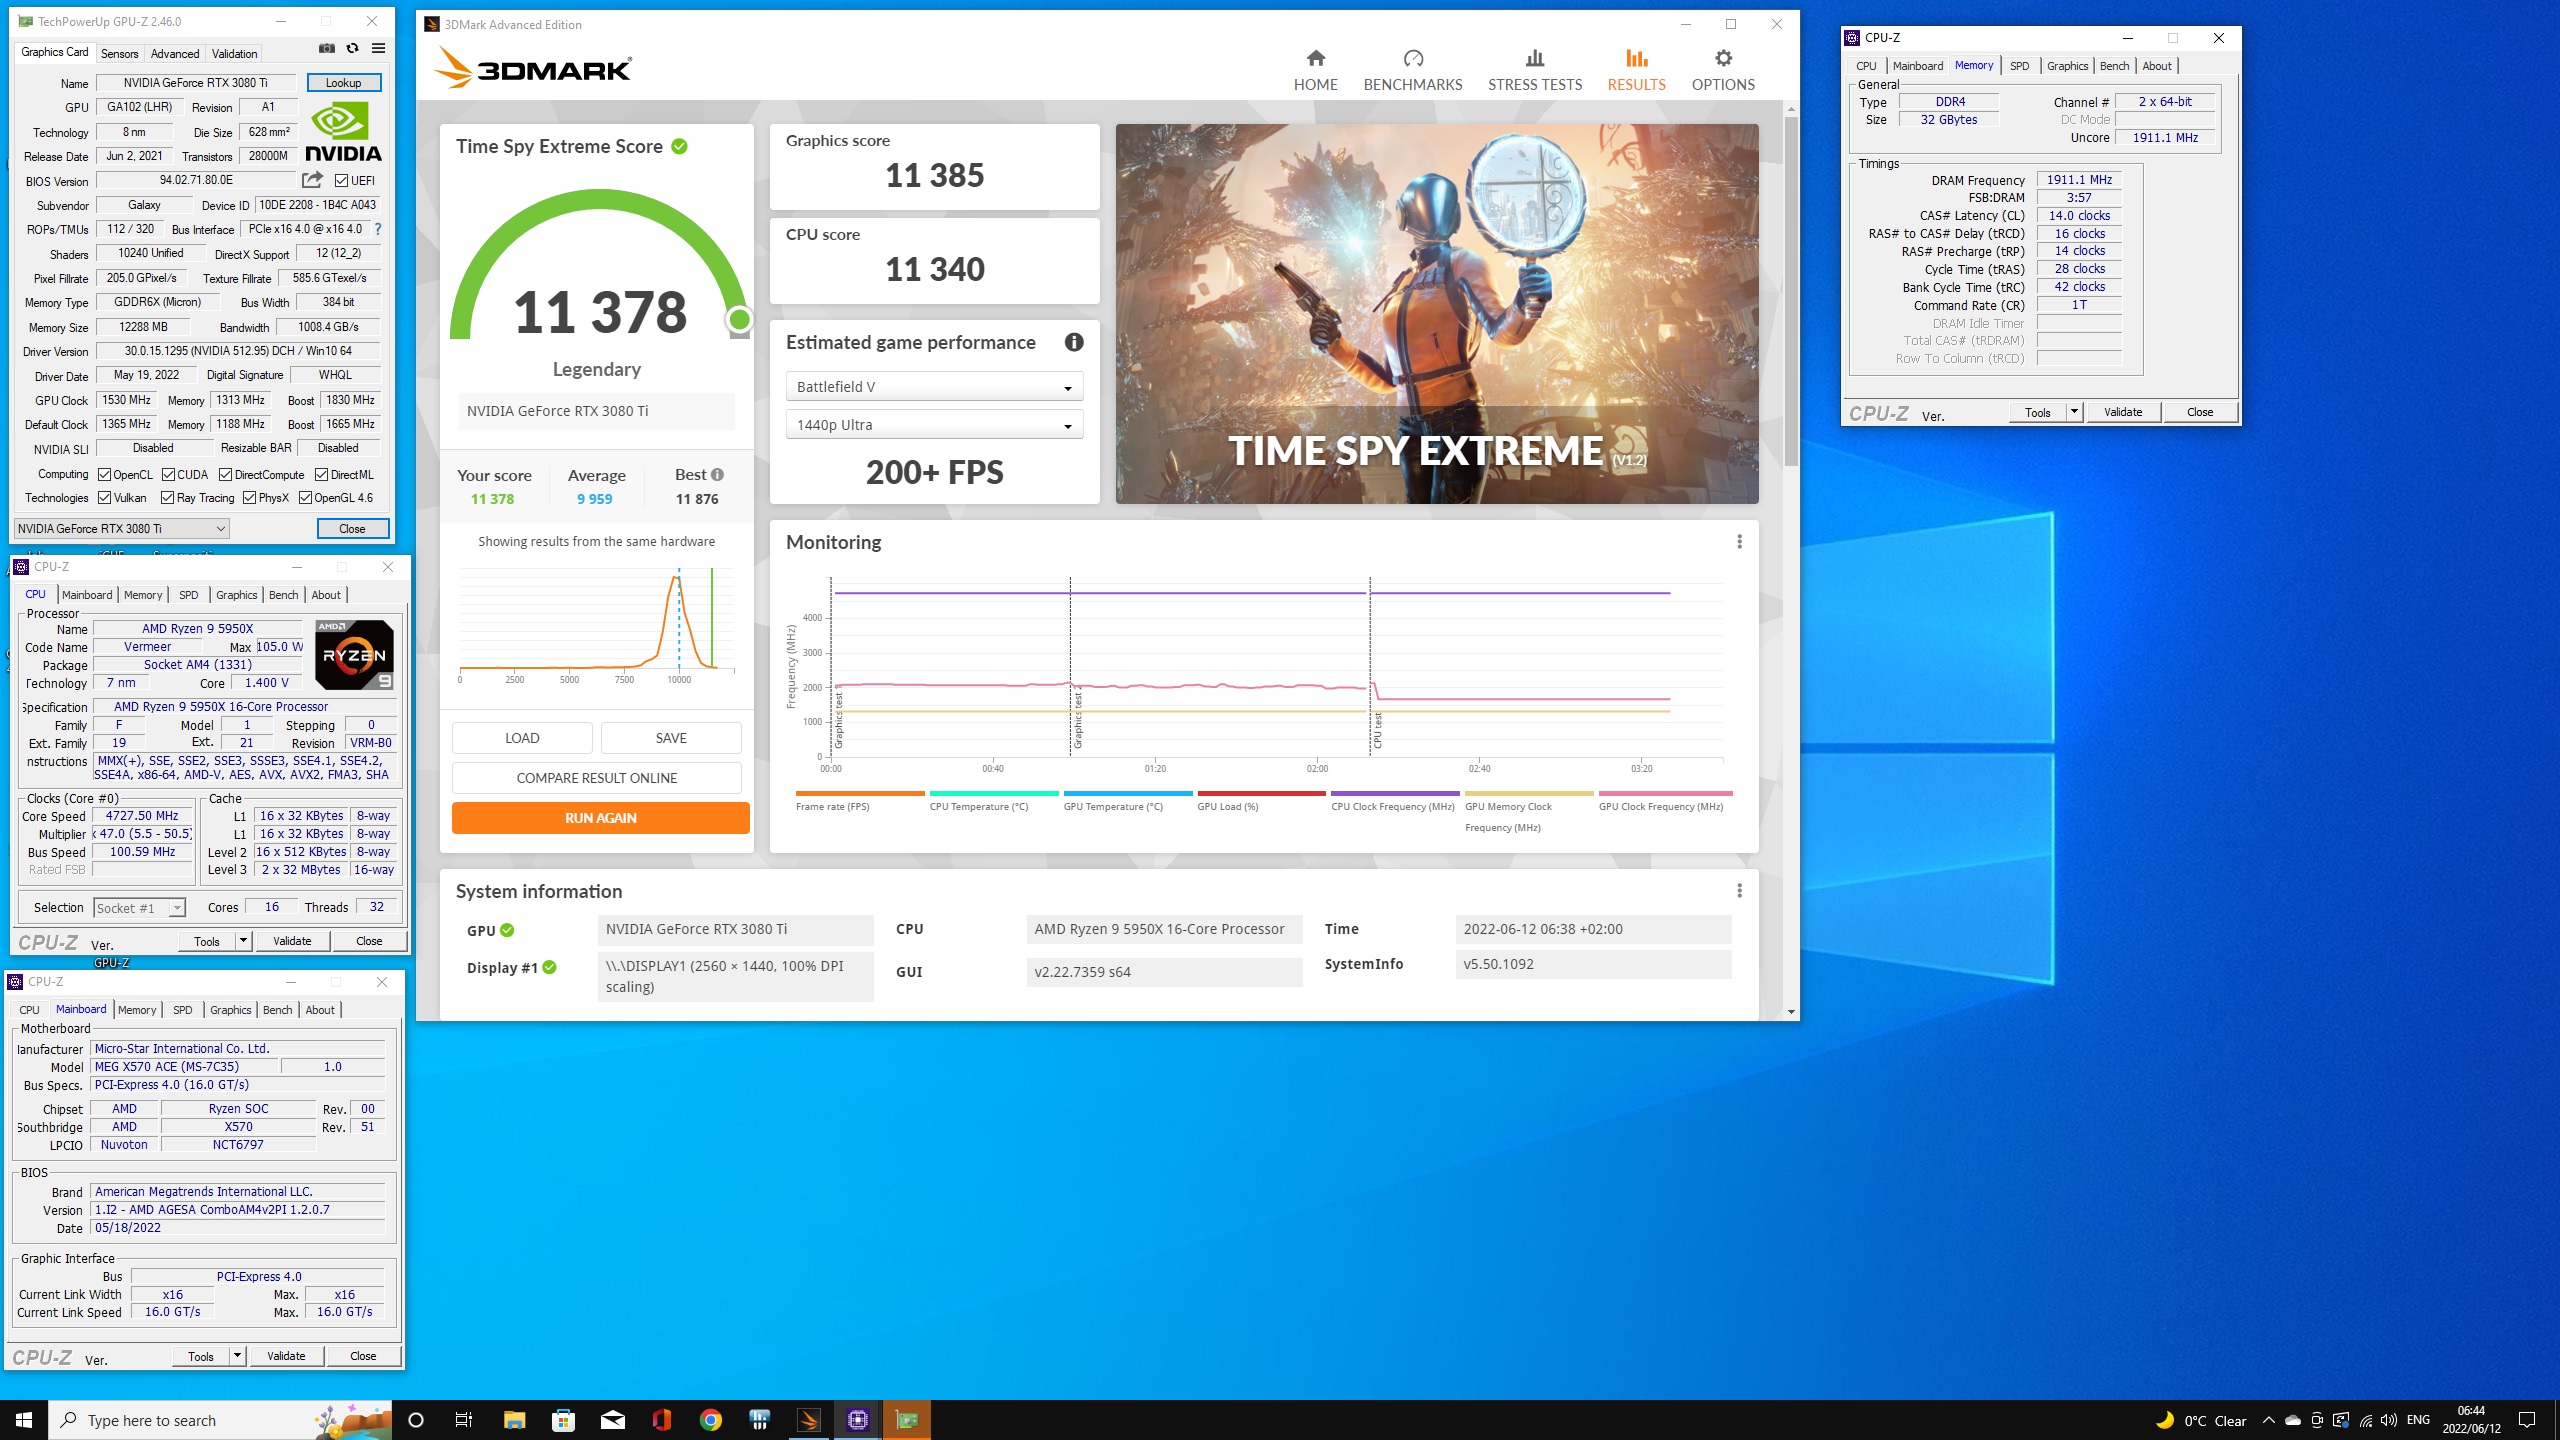 VPII`s 3DMark - Time Spy Extreme score: 11378 marks with a GeForce RTX 3080  Ti